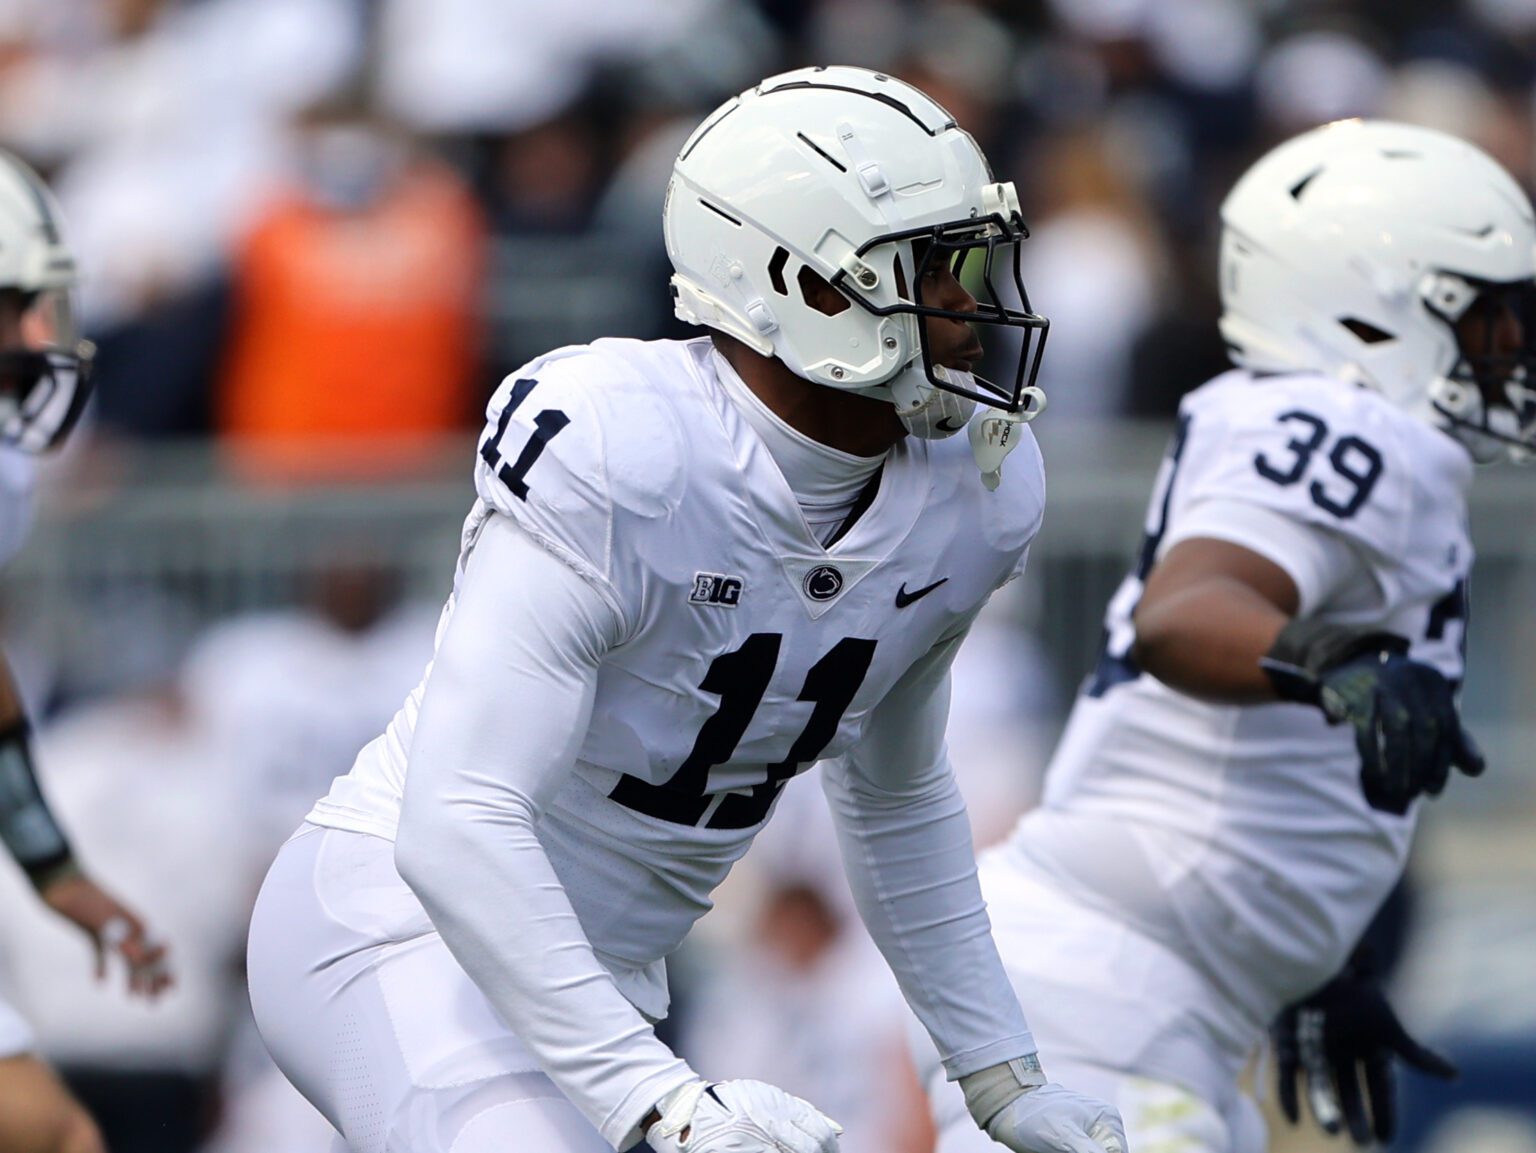 Penn State star football player Abdul Carter arrested after throwing a tow truck driver on the ground